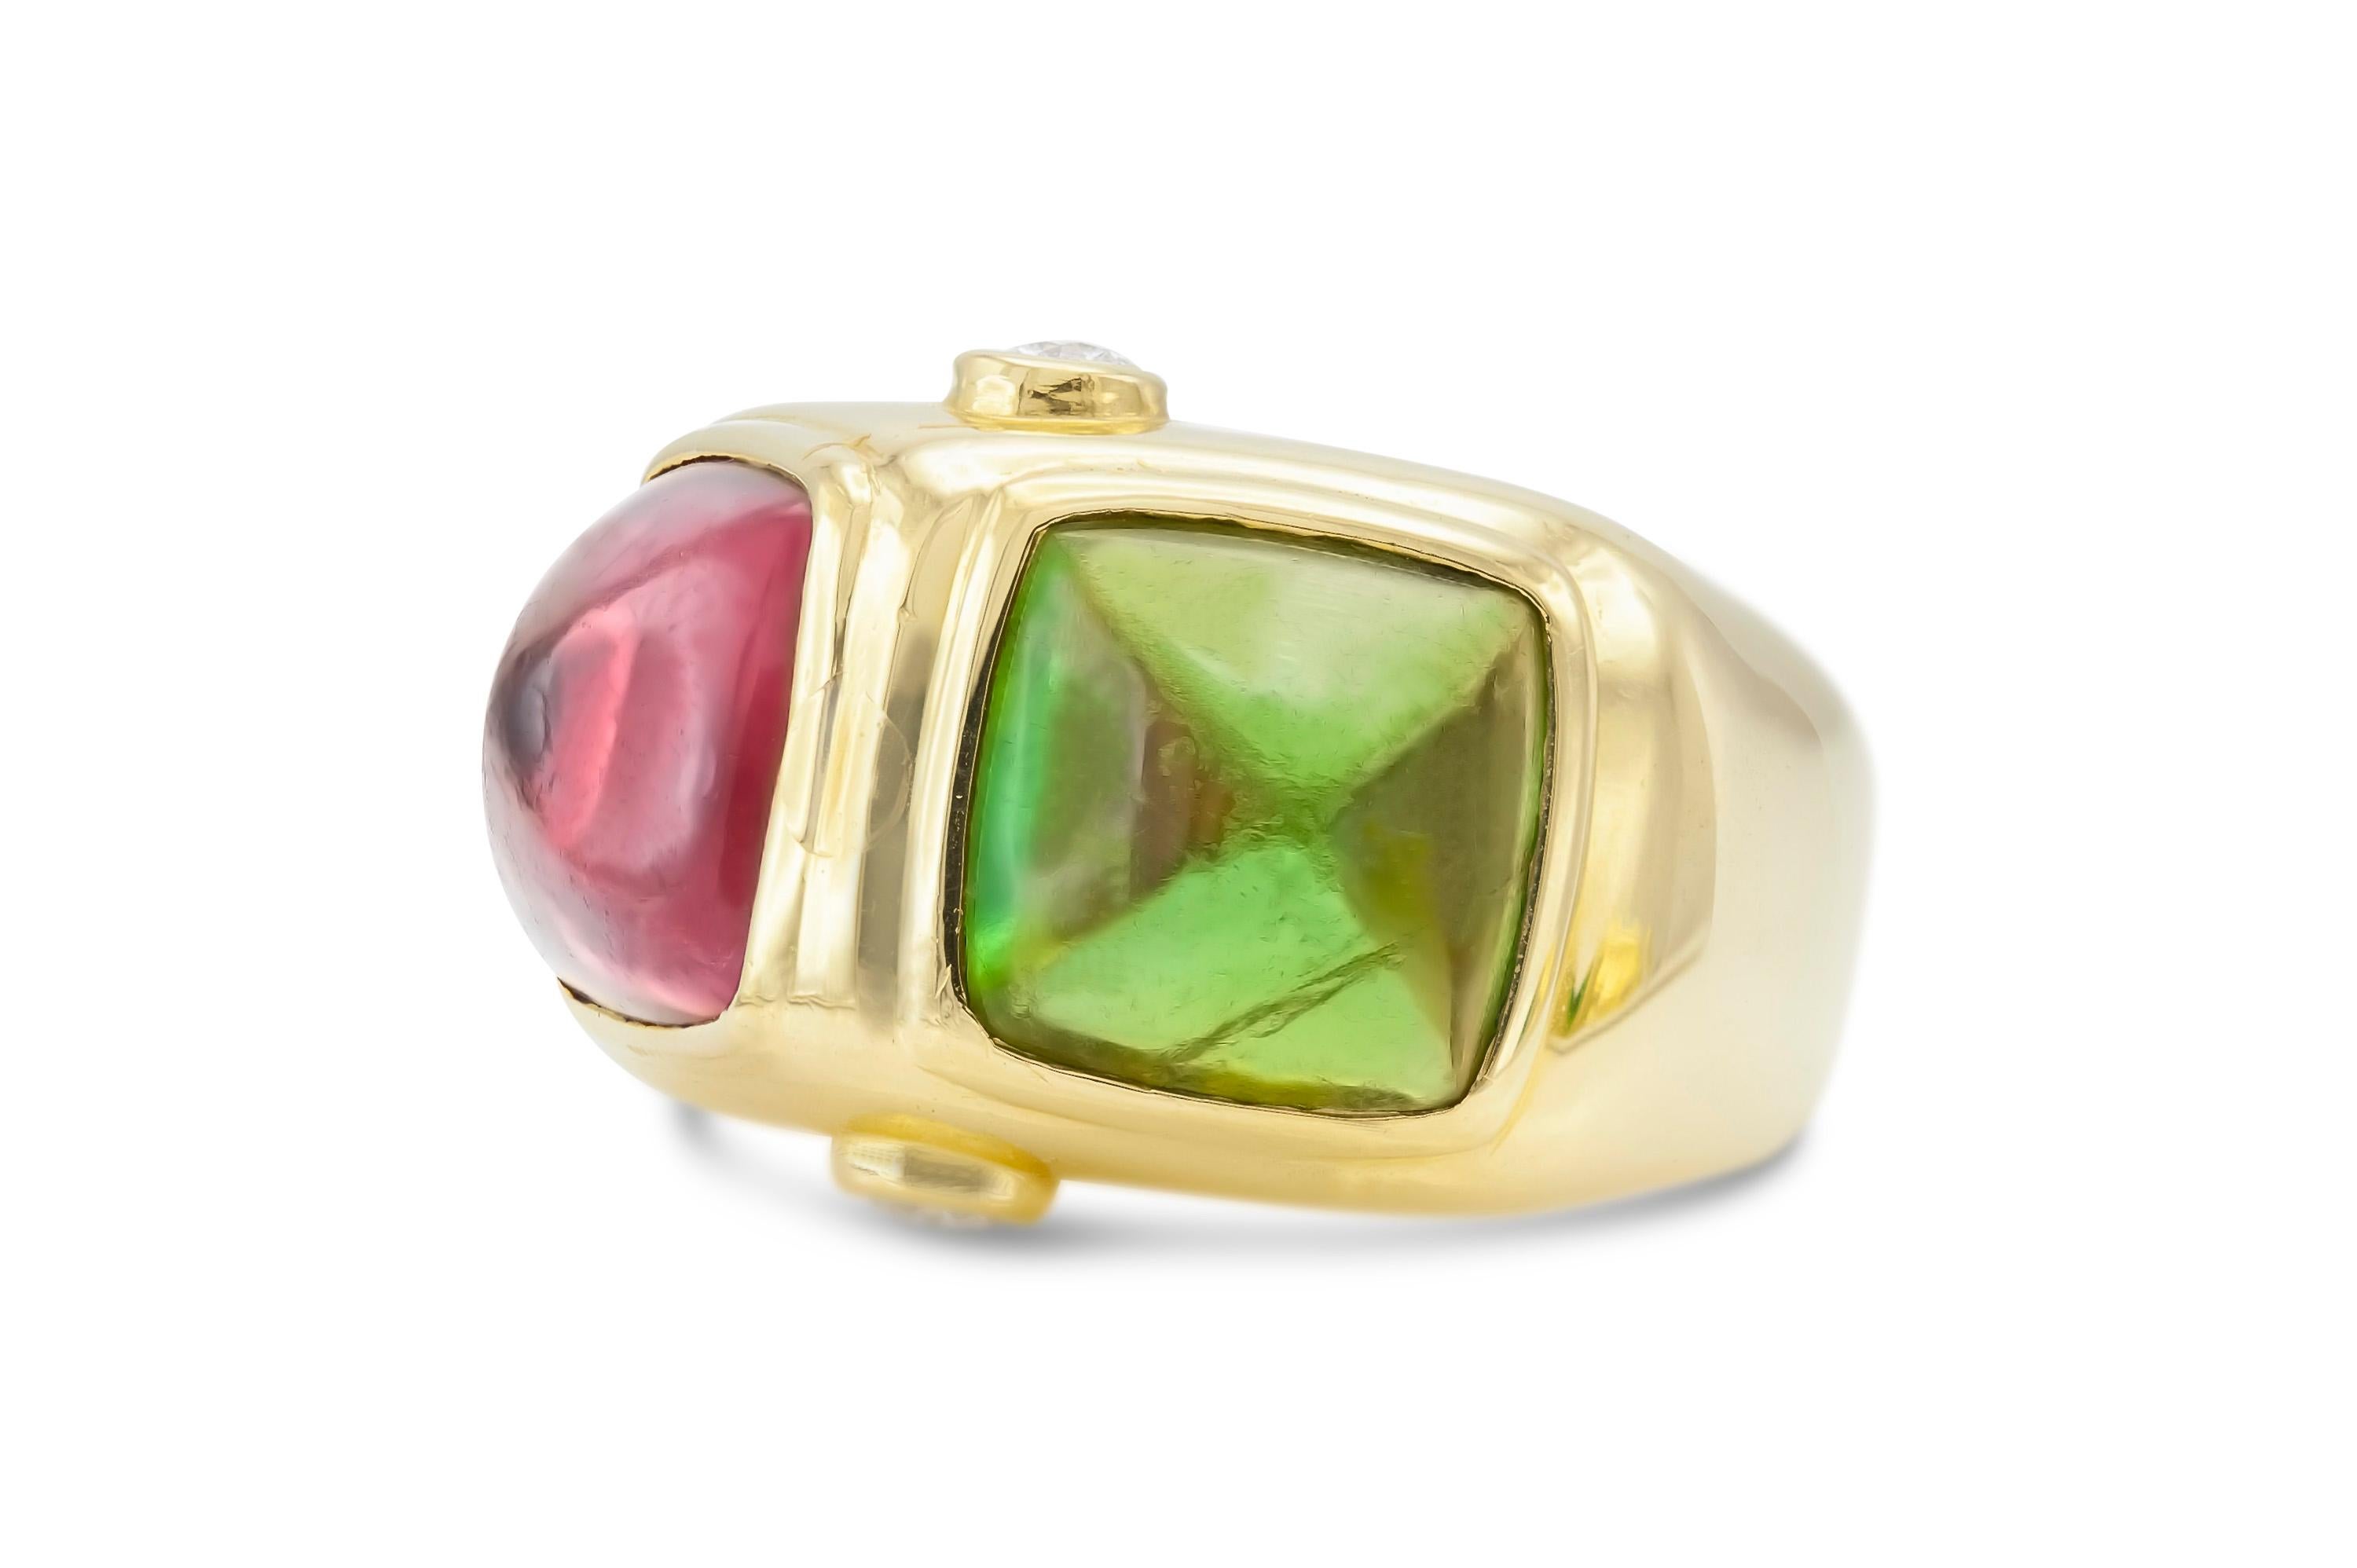 Finely crafted in 18k yellow gold with Red and Green Sugarloaf Tourmalines.
The ring features two round brilliant cut diamonds.
Swiss made
Size 7 3/4